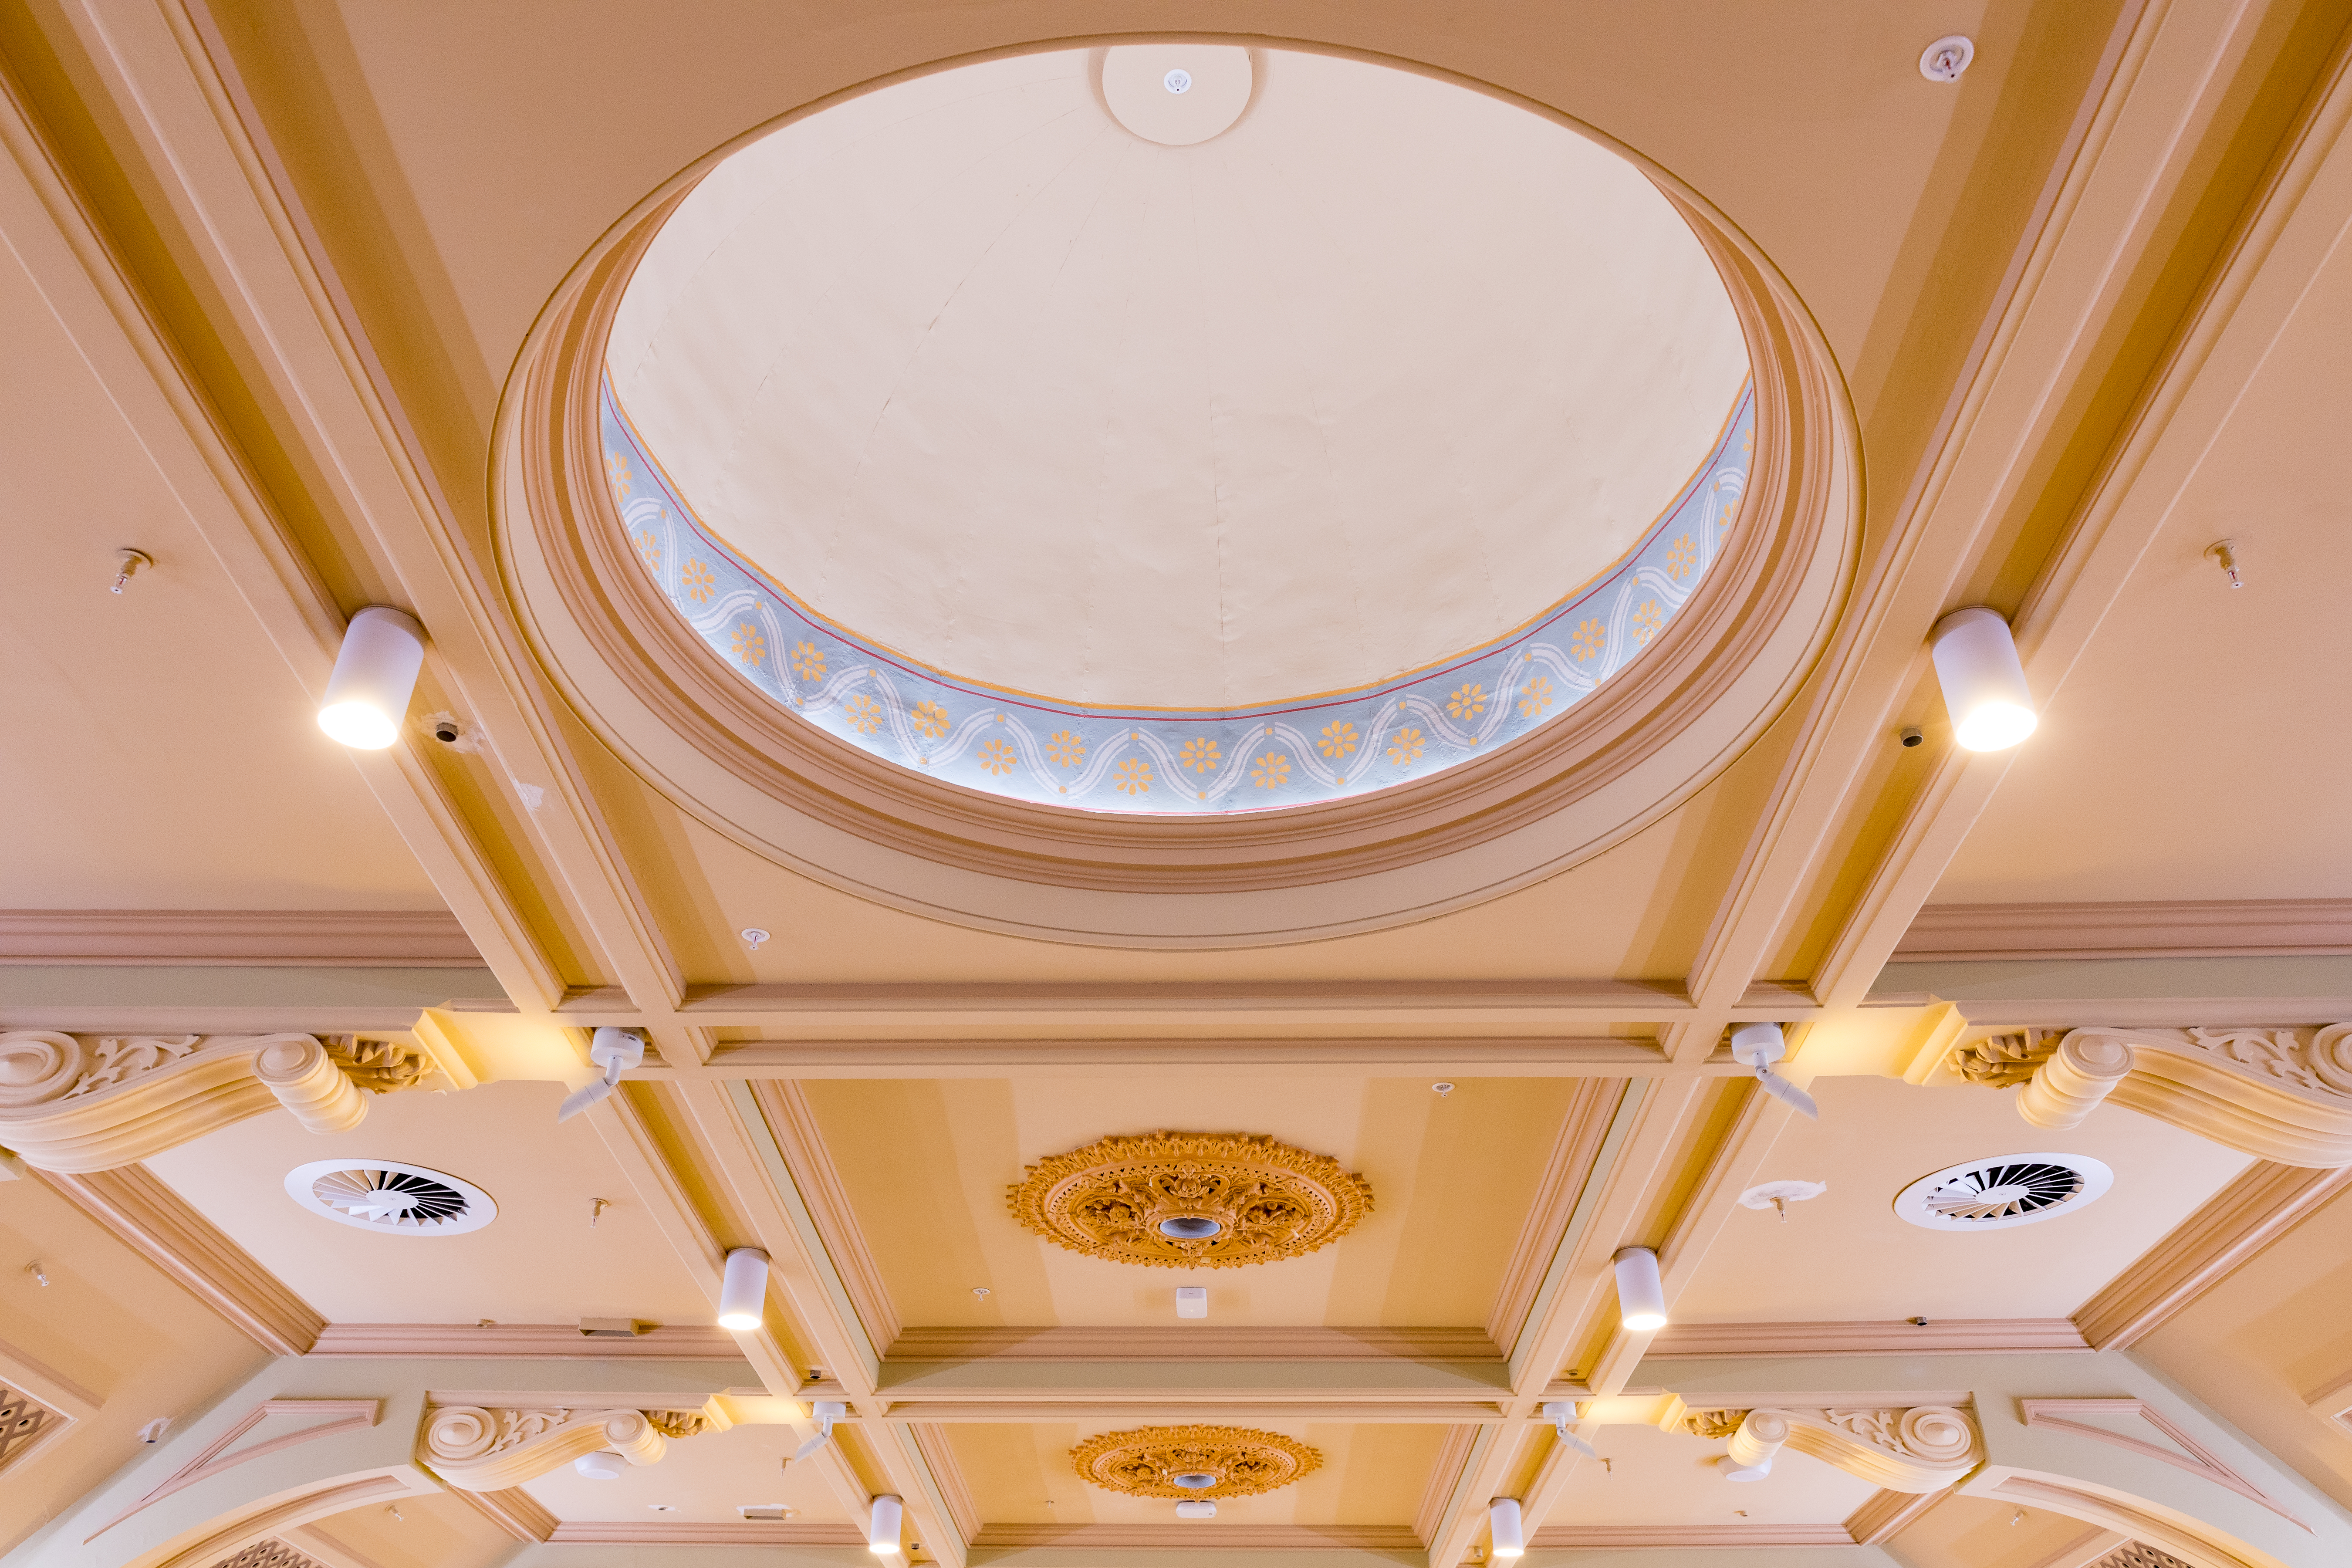 Brightly lit image of the ceiling in the great hall, showing the intricate details